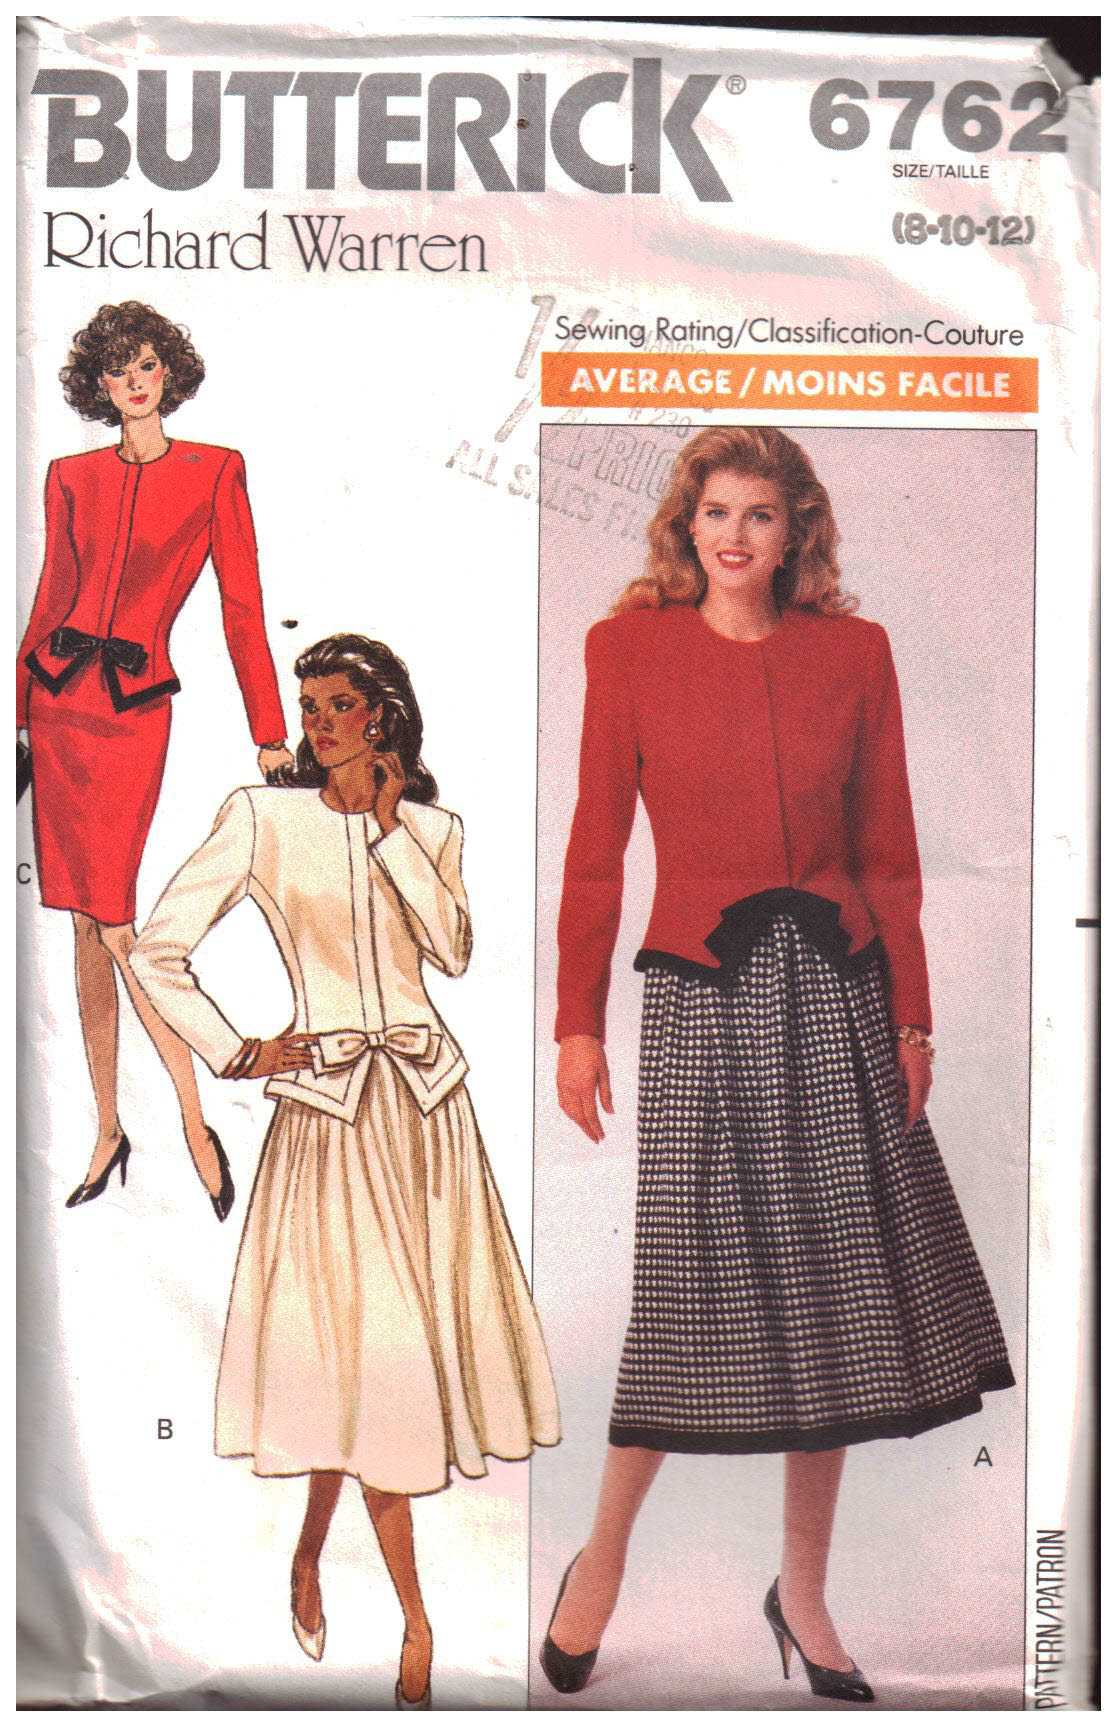 Butterick 6762 Suit - Top, Skirt Size: 8-10-12 Used Sewing Pattern